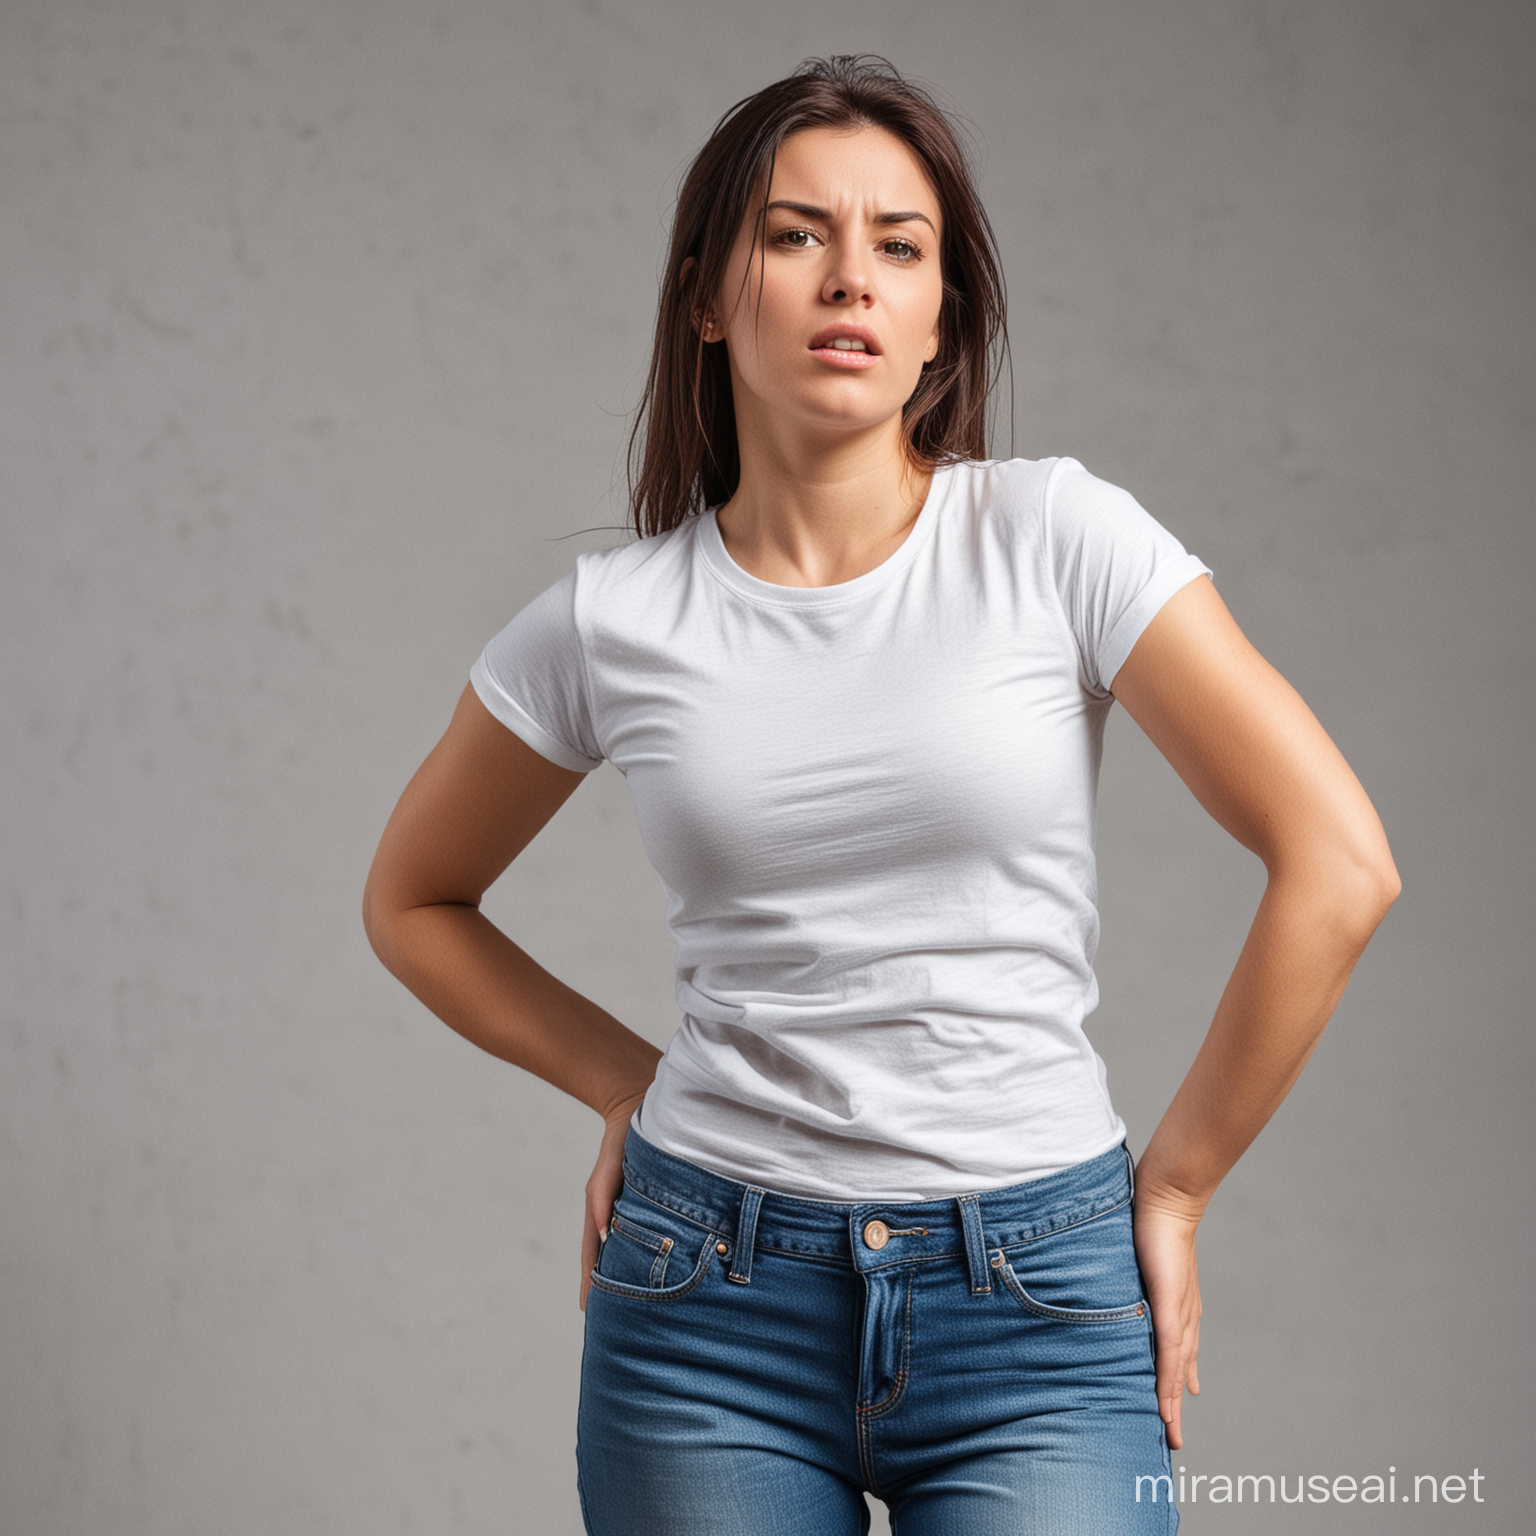 woman wearing t-shirt and jeans sweating